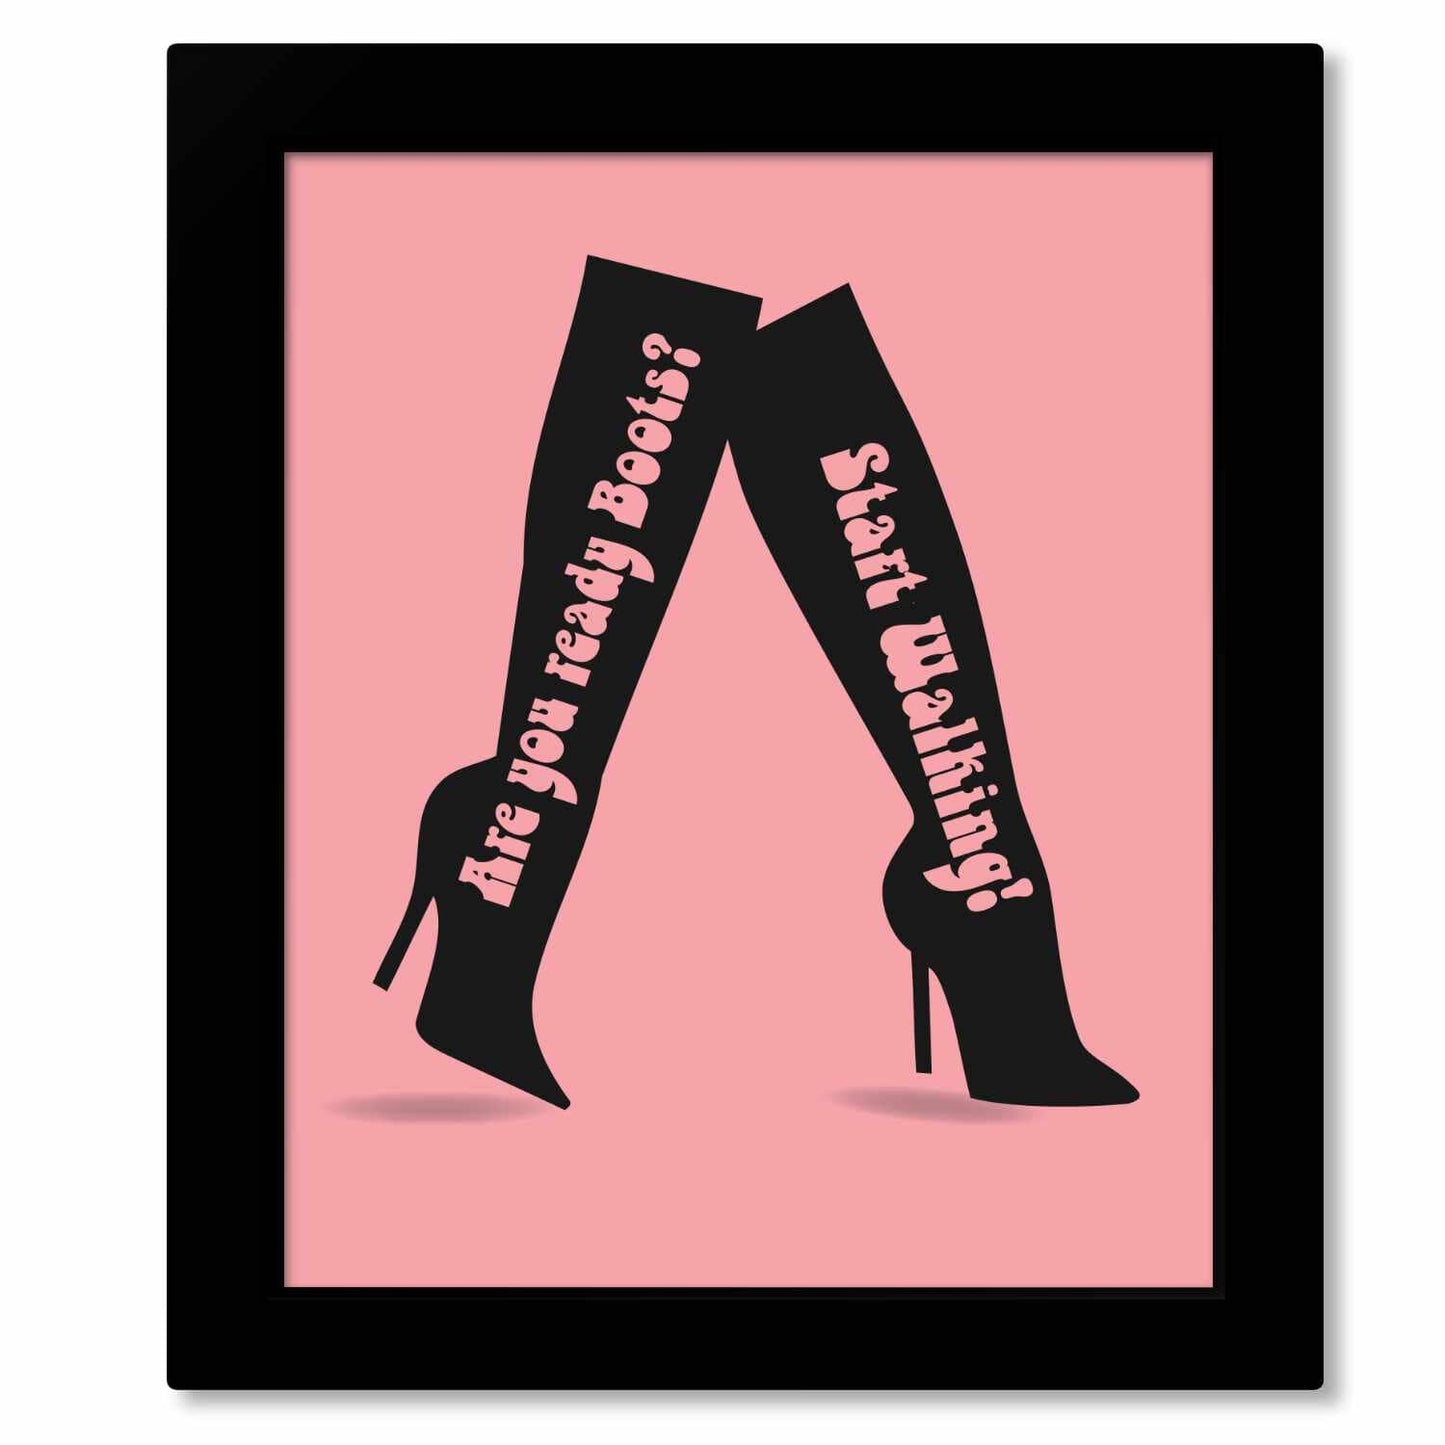 These Boots Are Made for Walkin' by Nancy Sinatra - 60s Art Song Lyrics Art Song Lyrics Art 8x10 Framed Print (without mat) 